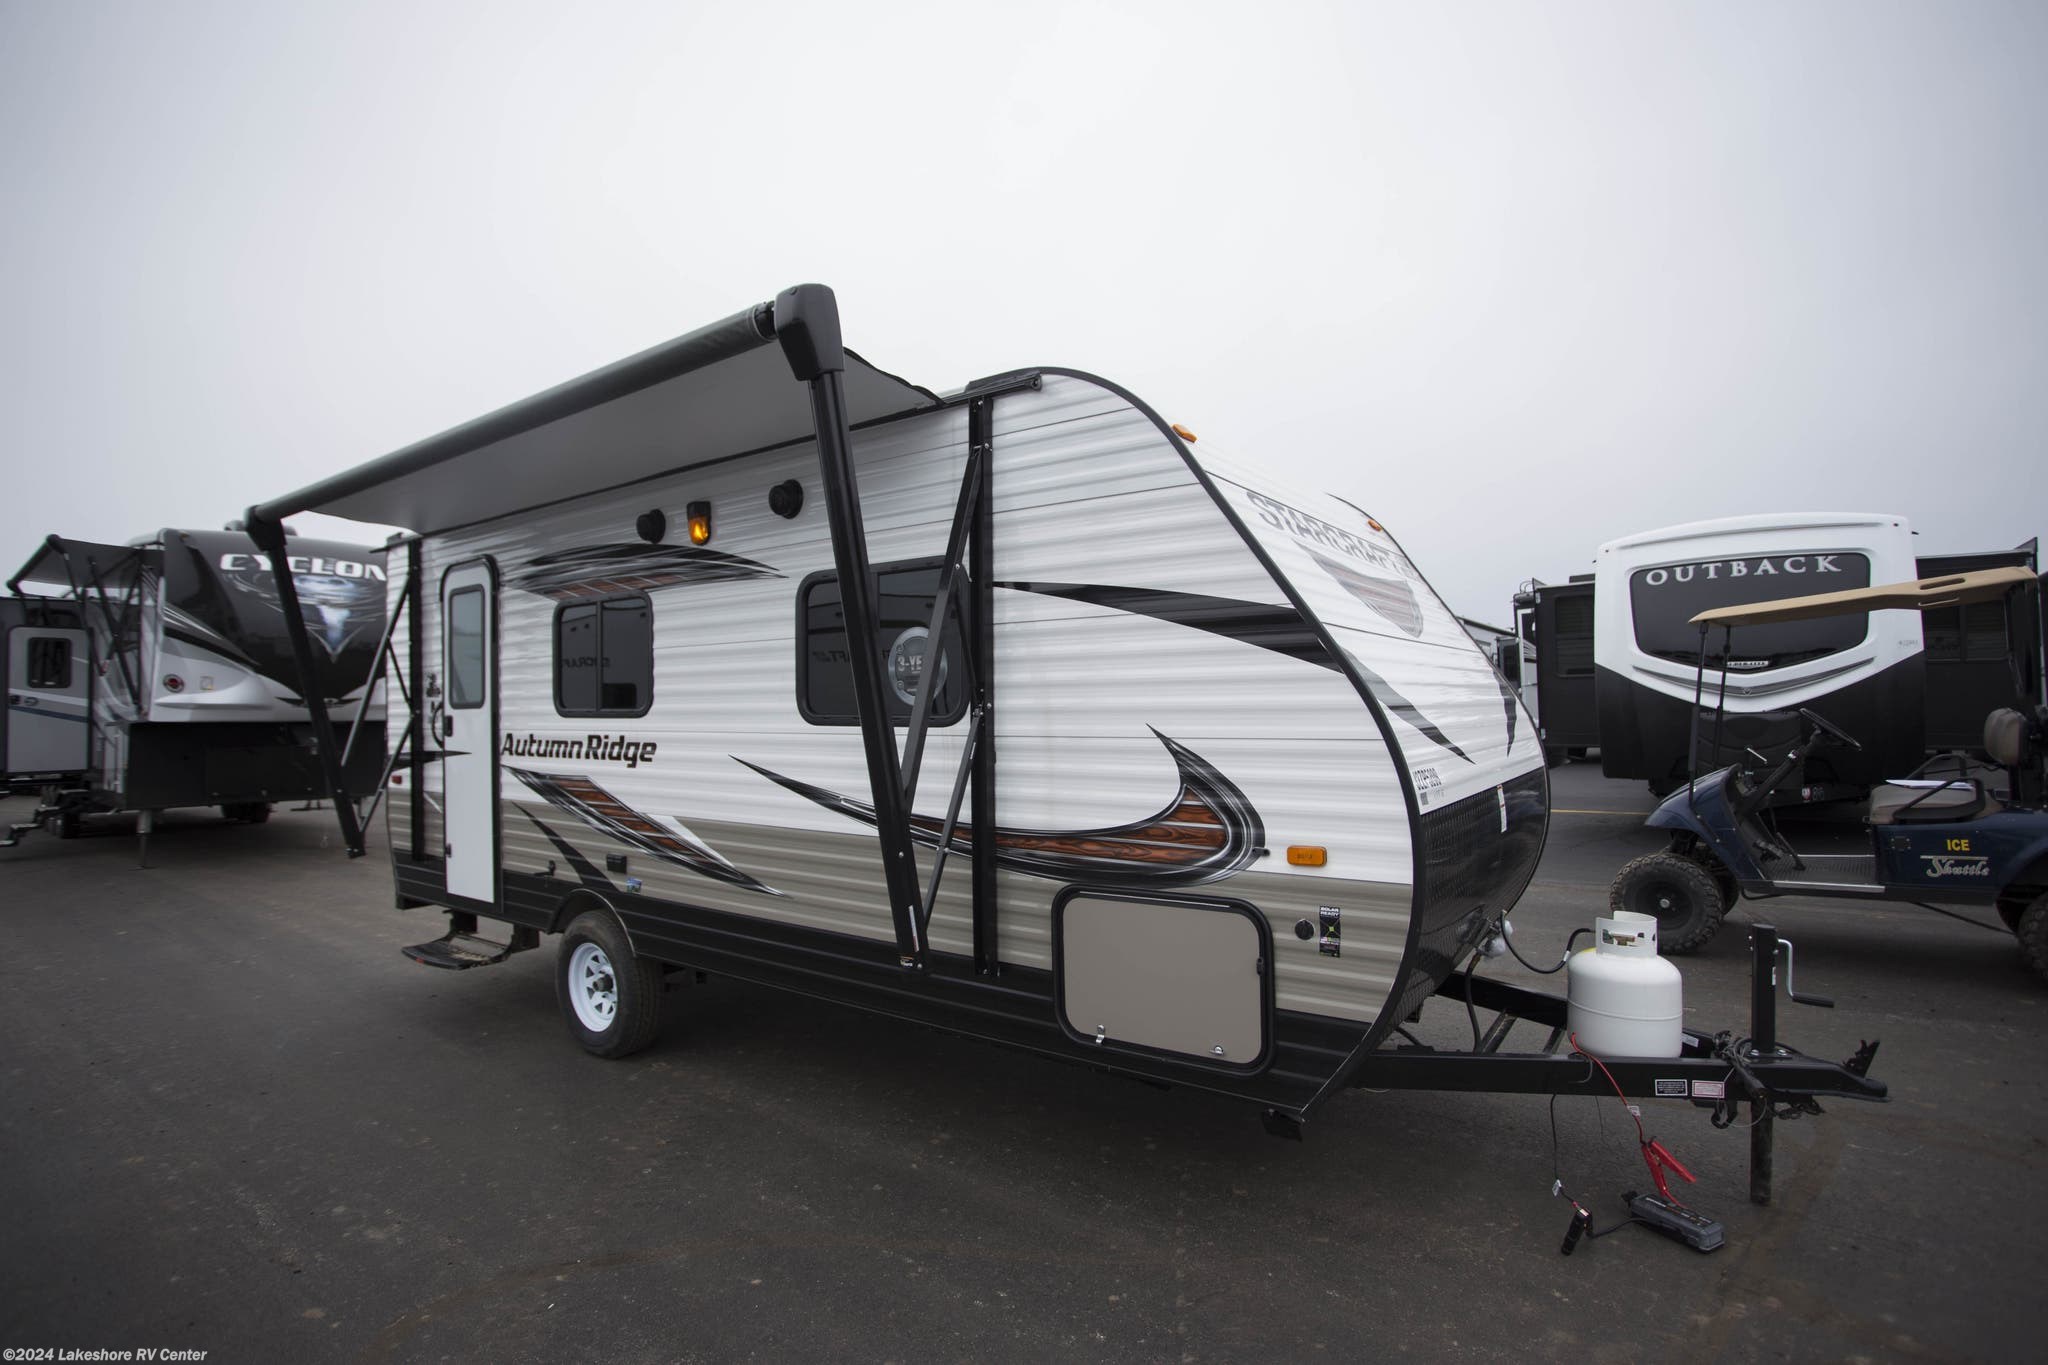 2018 Starcraft Autumn Ridge Outfitter 18QB RV for Sale in Muskegon, MI 49442 | 26840 | RVUSA.com 2018 Starcraft Autumn Ridge Outfitter 18qb Specs